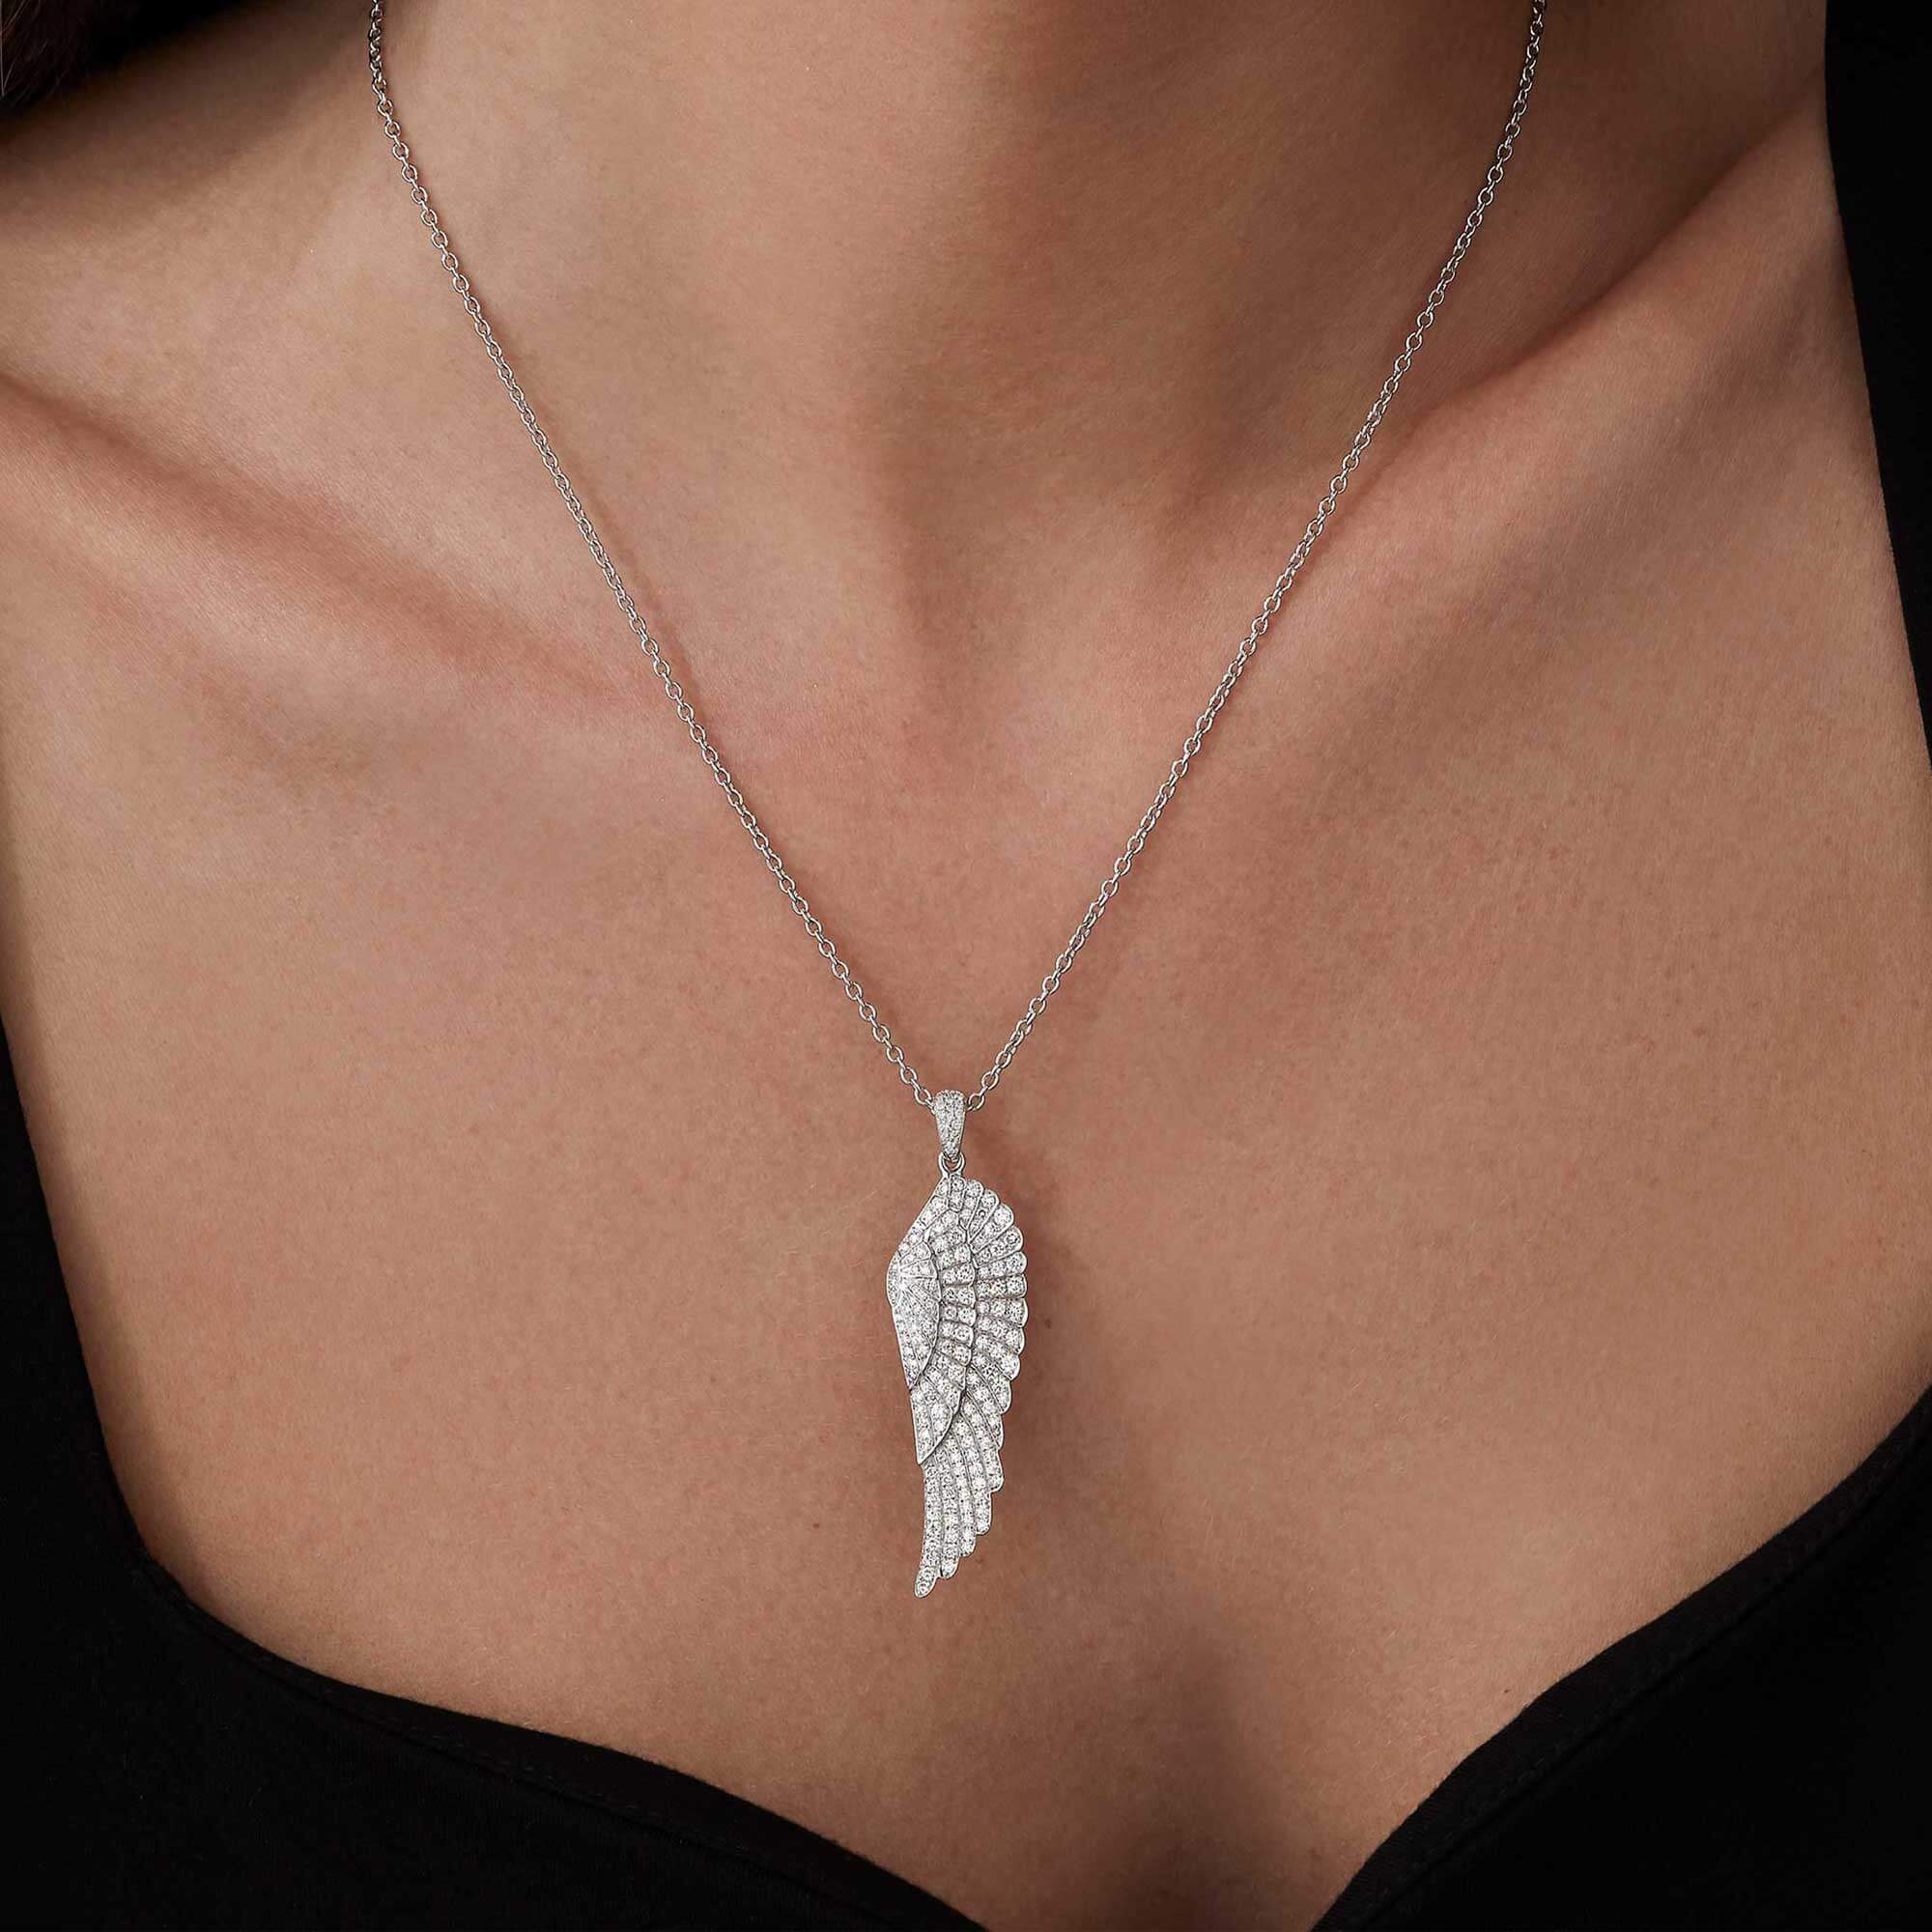 Garrard Wings Classic jewellery collection Diamond Pendant In 18ct White Gold, 2008168, and earrings 2013181, on model